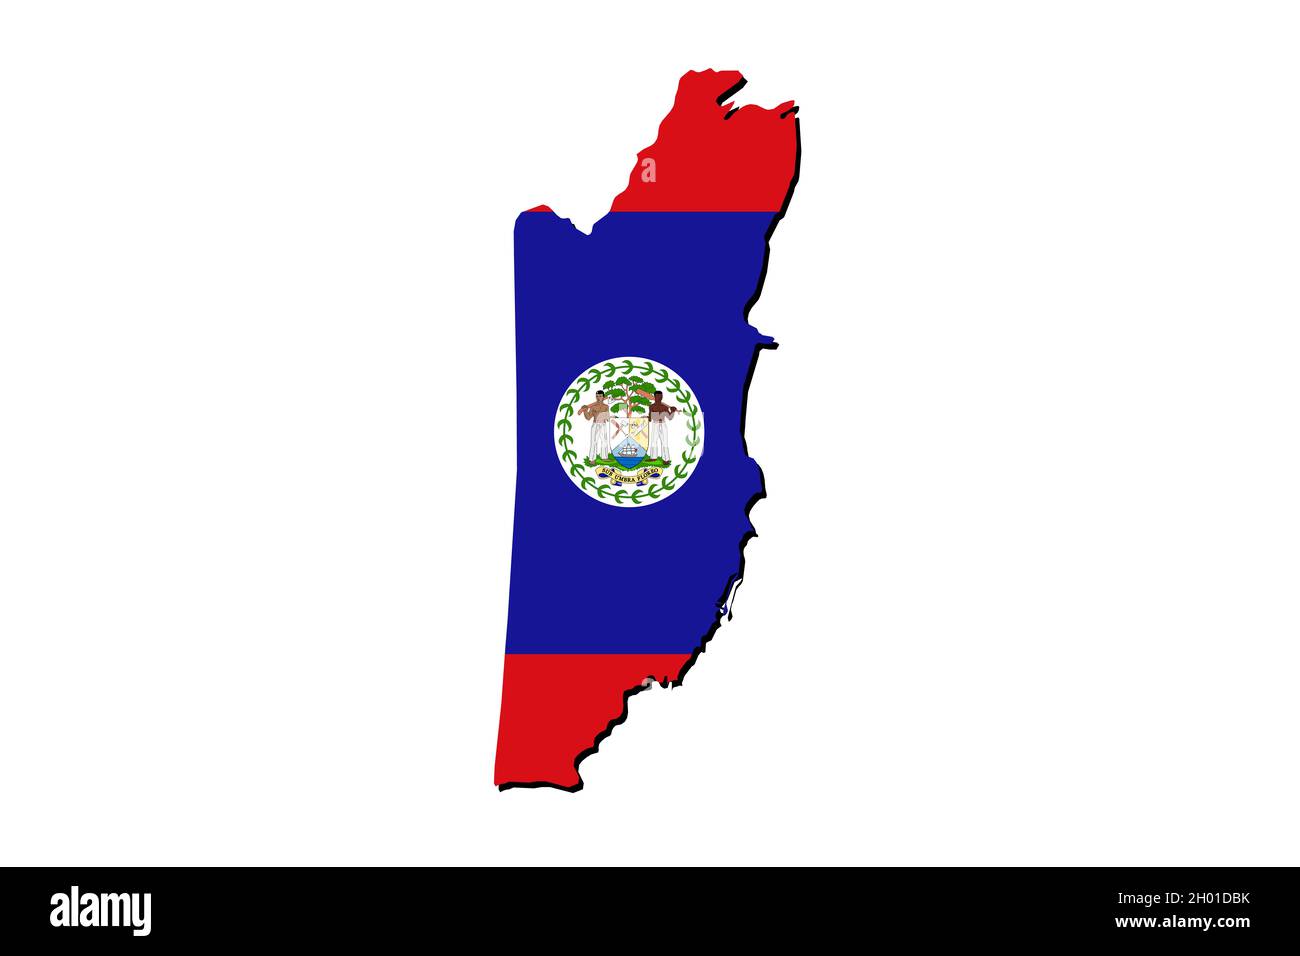 Outline map of Belize with the national flag superimposed over the country. 3D graphics casting a shadow on the white background Stock Photo